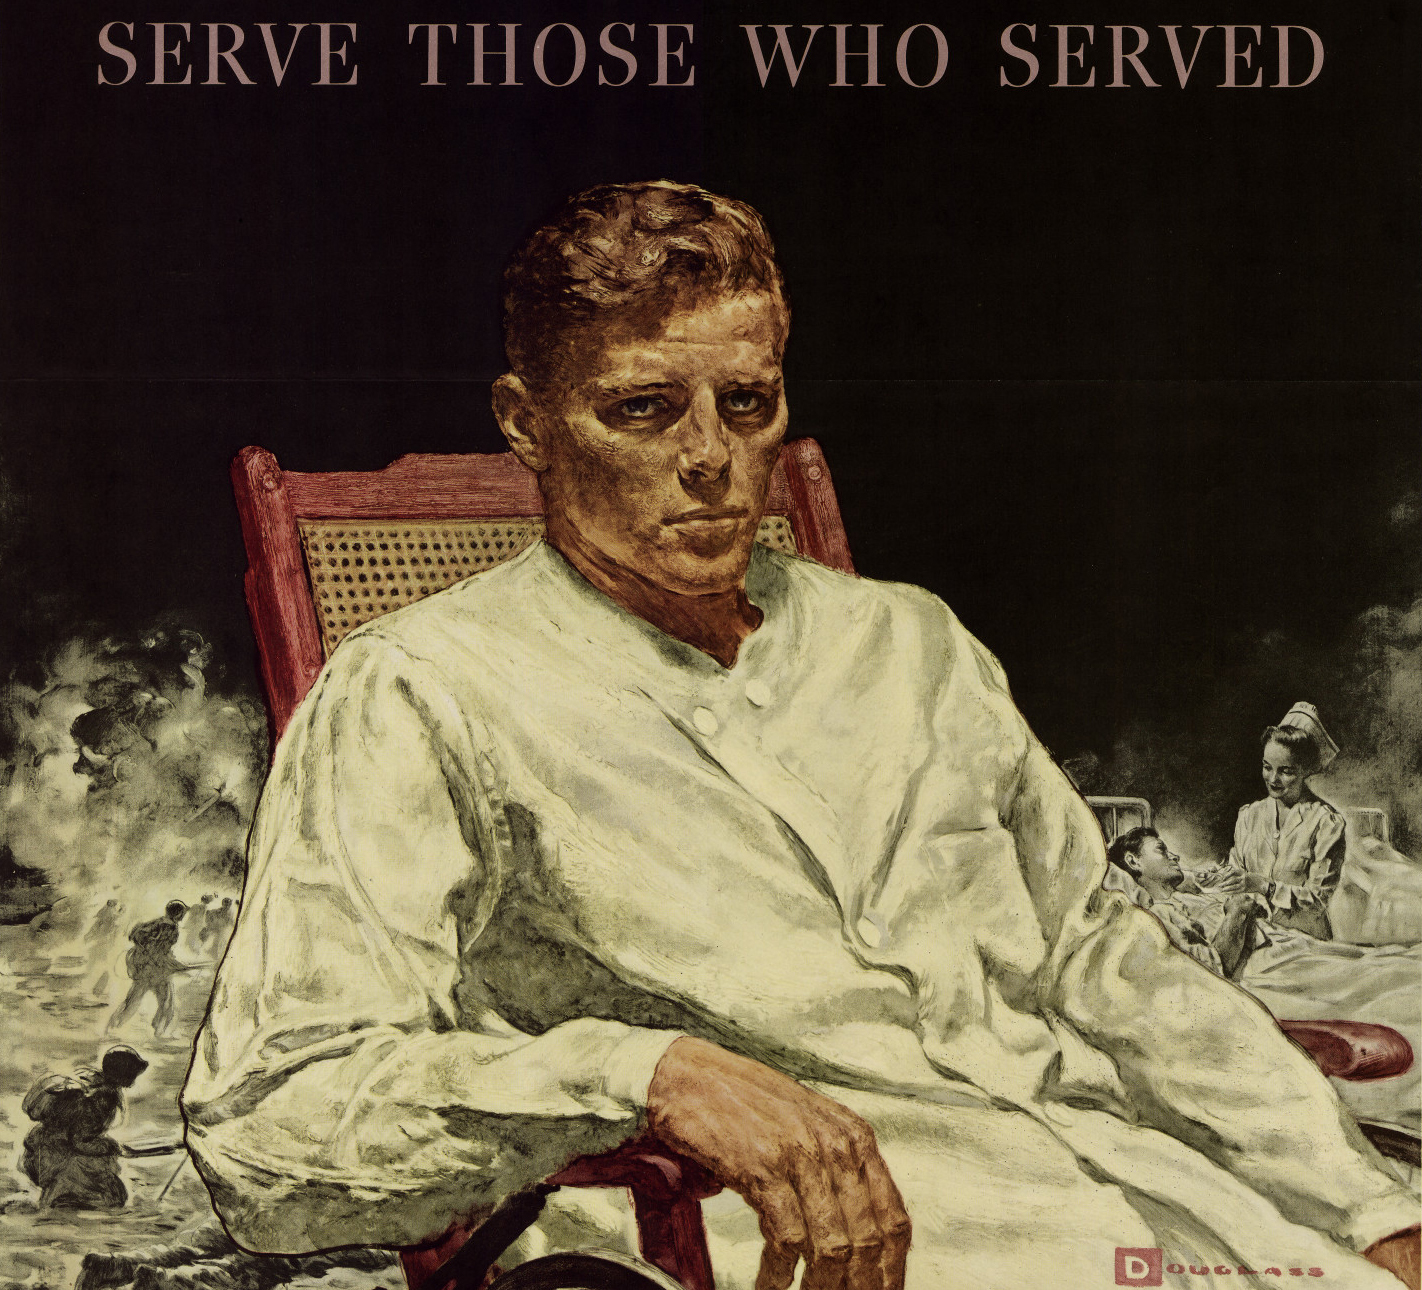 Read Object 43: Nurse Recruiting Poster